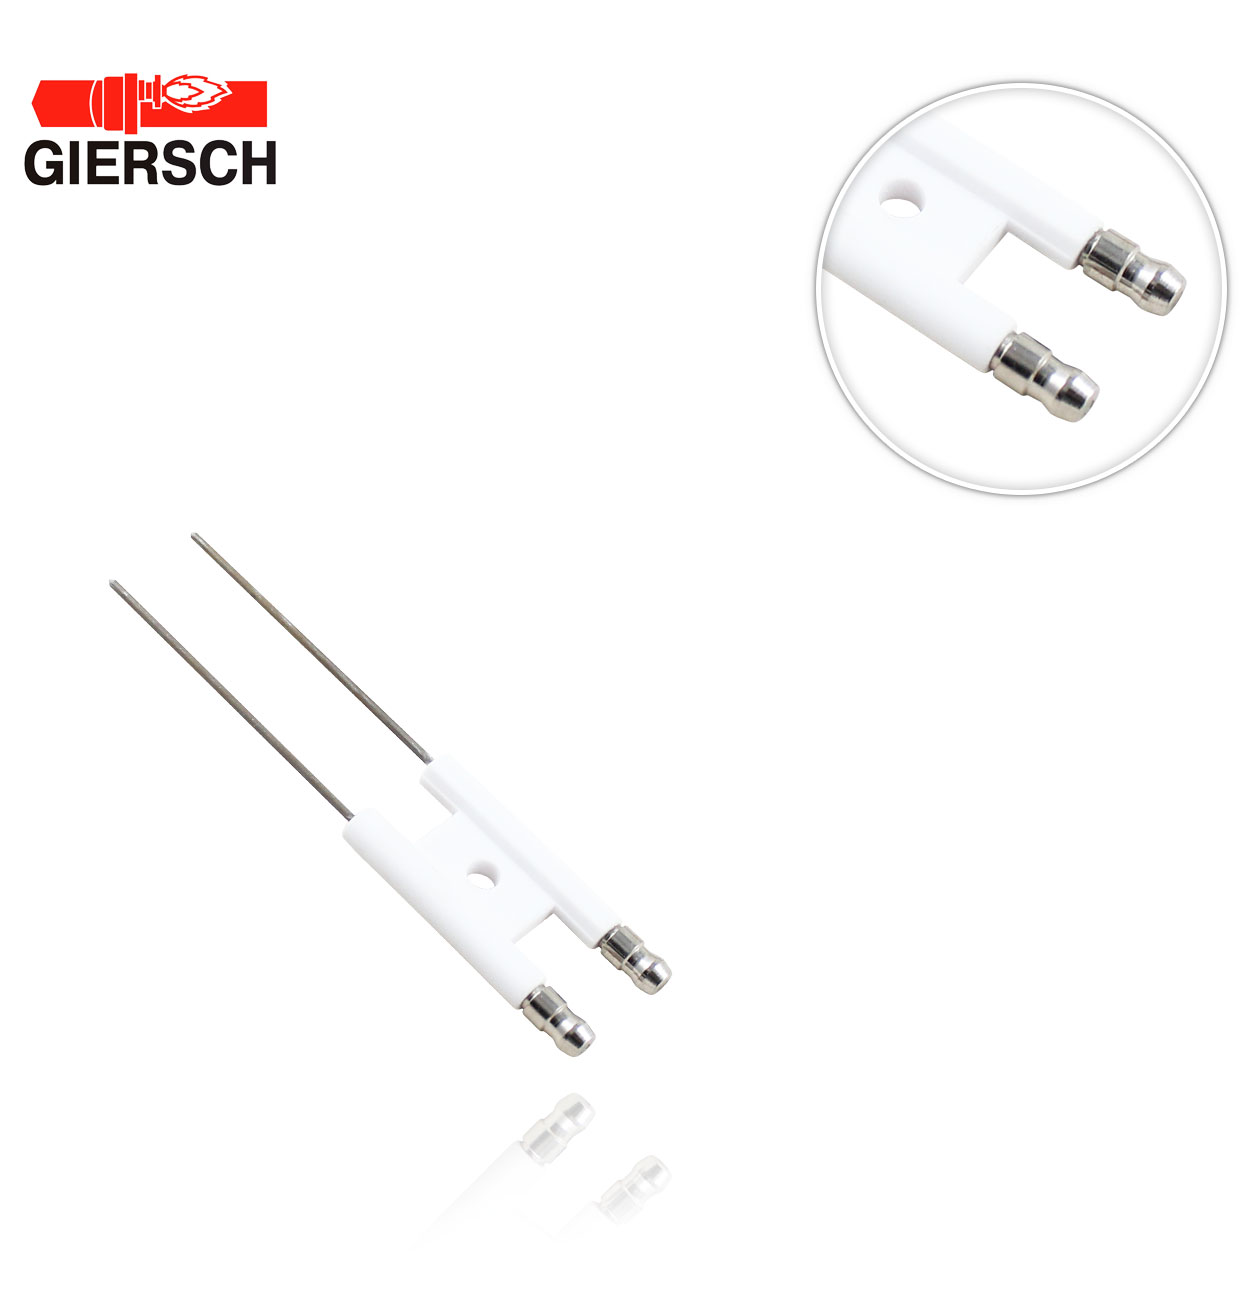 DOUBLE ELECTRODE PACK 5 pcs. FOR GIERSCH MG1/MG2/MG10 /MG3/